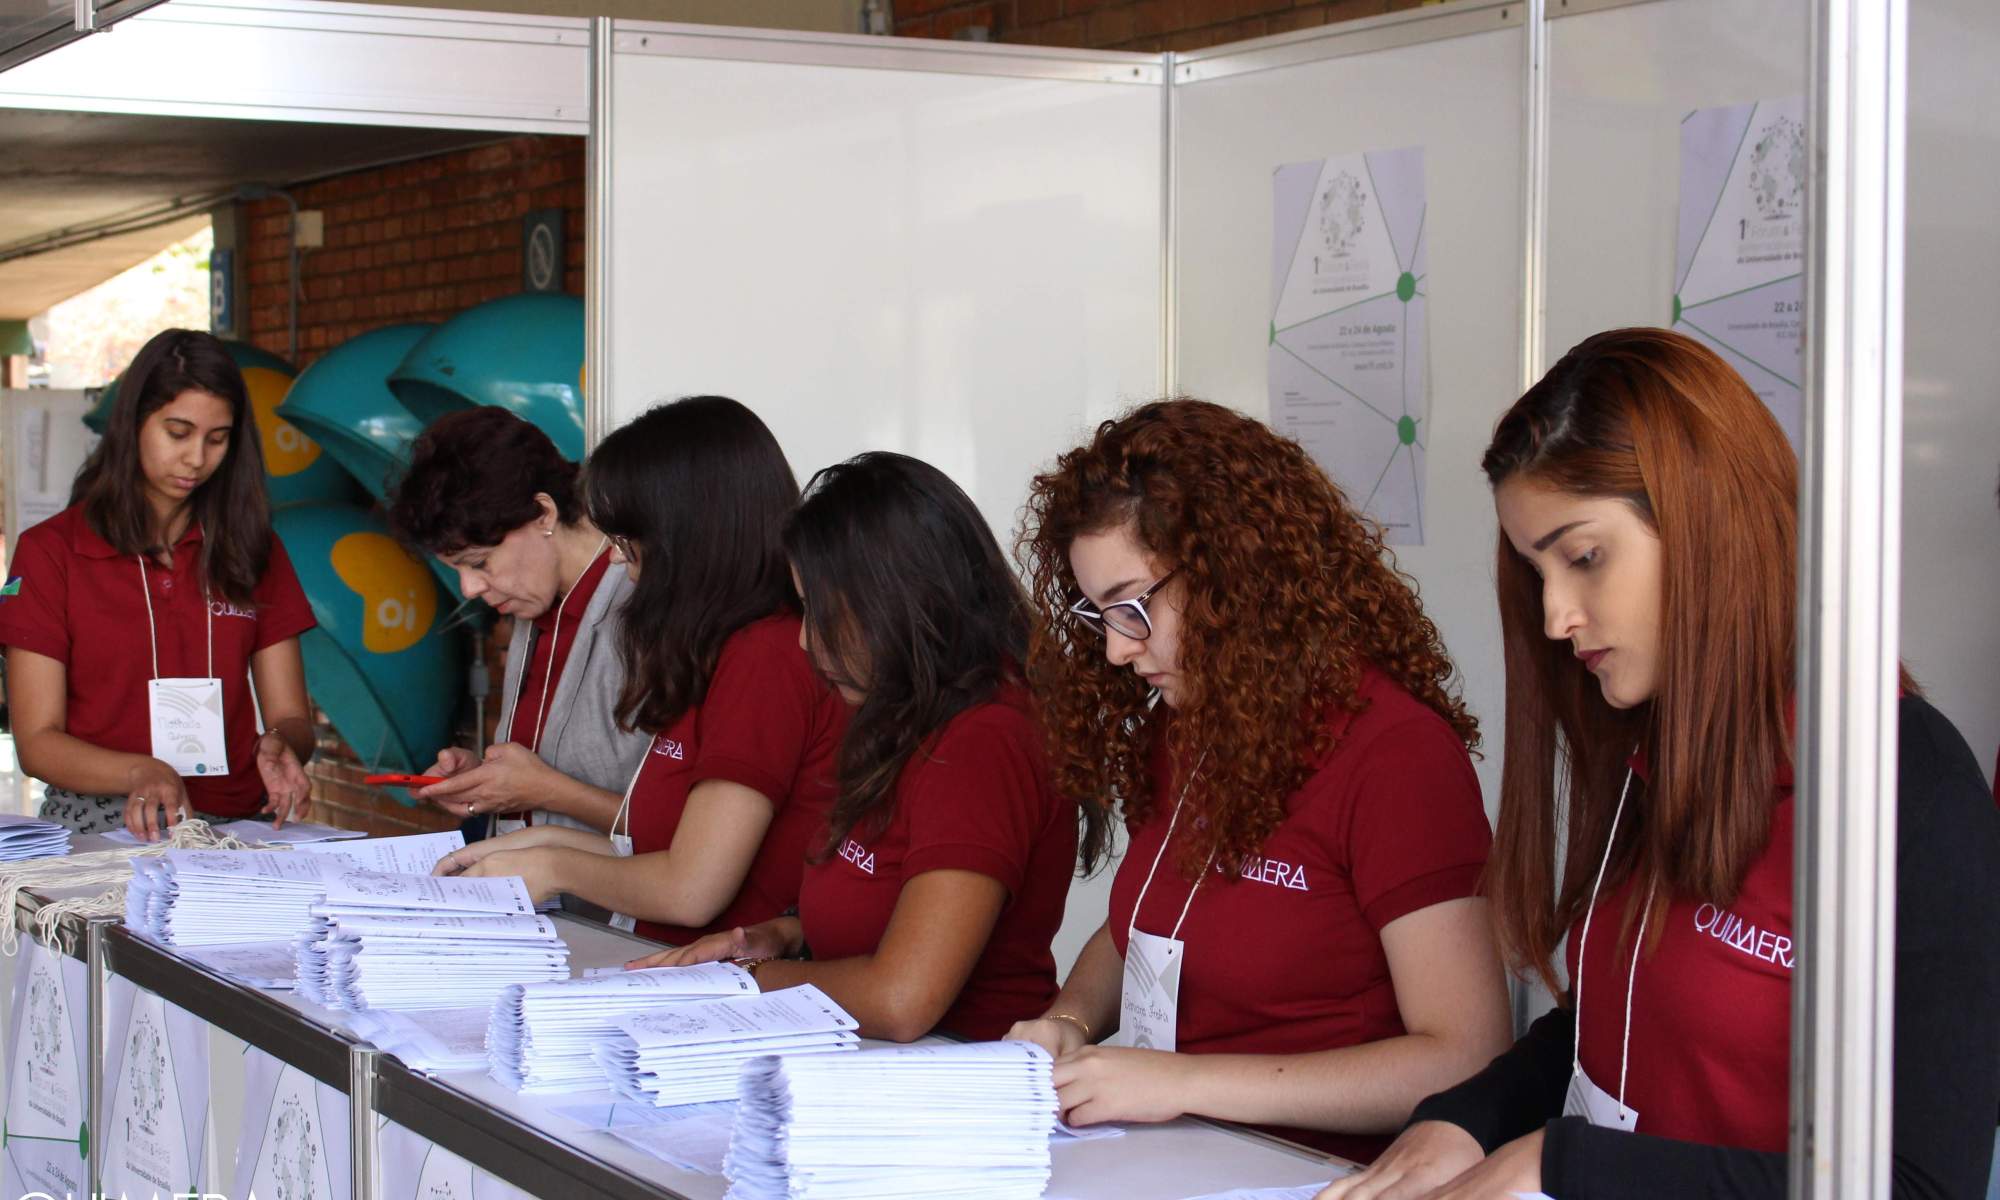 Image of the team, with the Quimera's shirt, working at the Internationalization Fair event